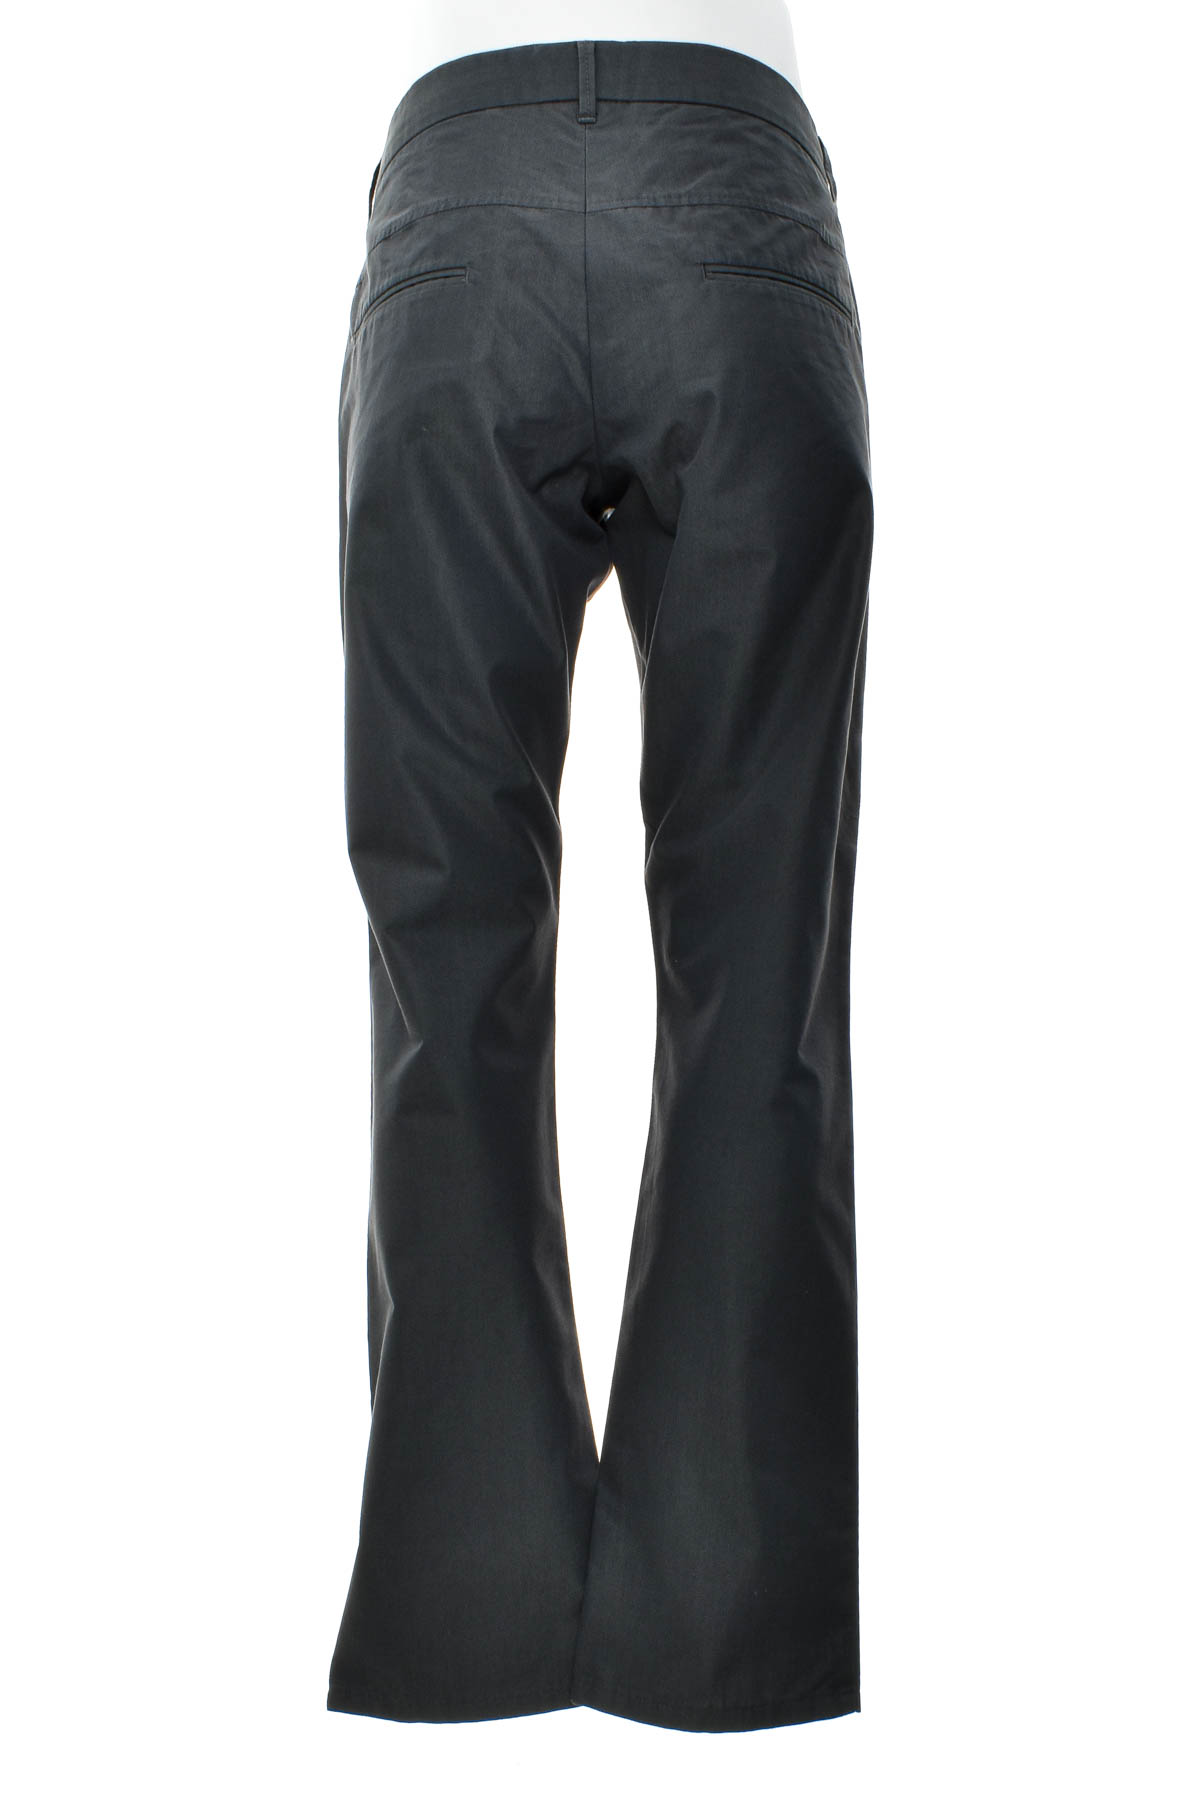 Men's trousers - Chinos - 1